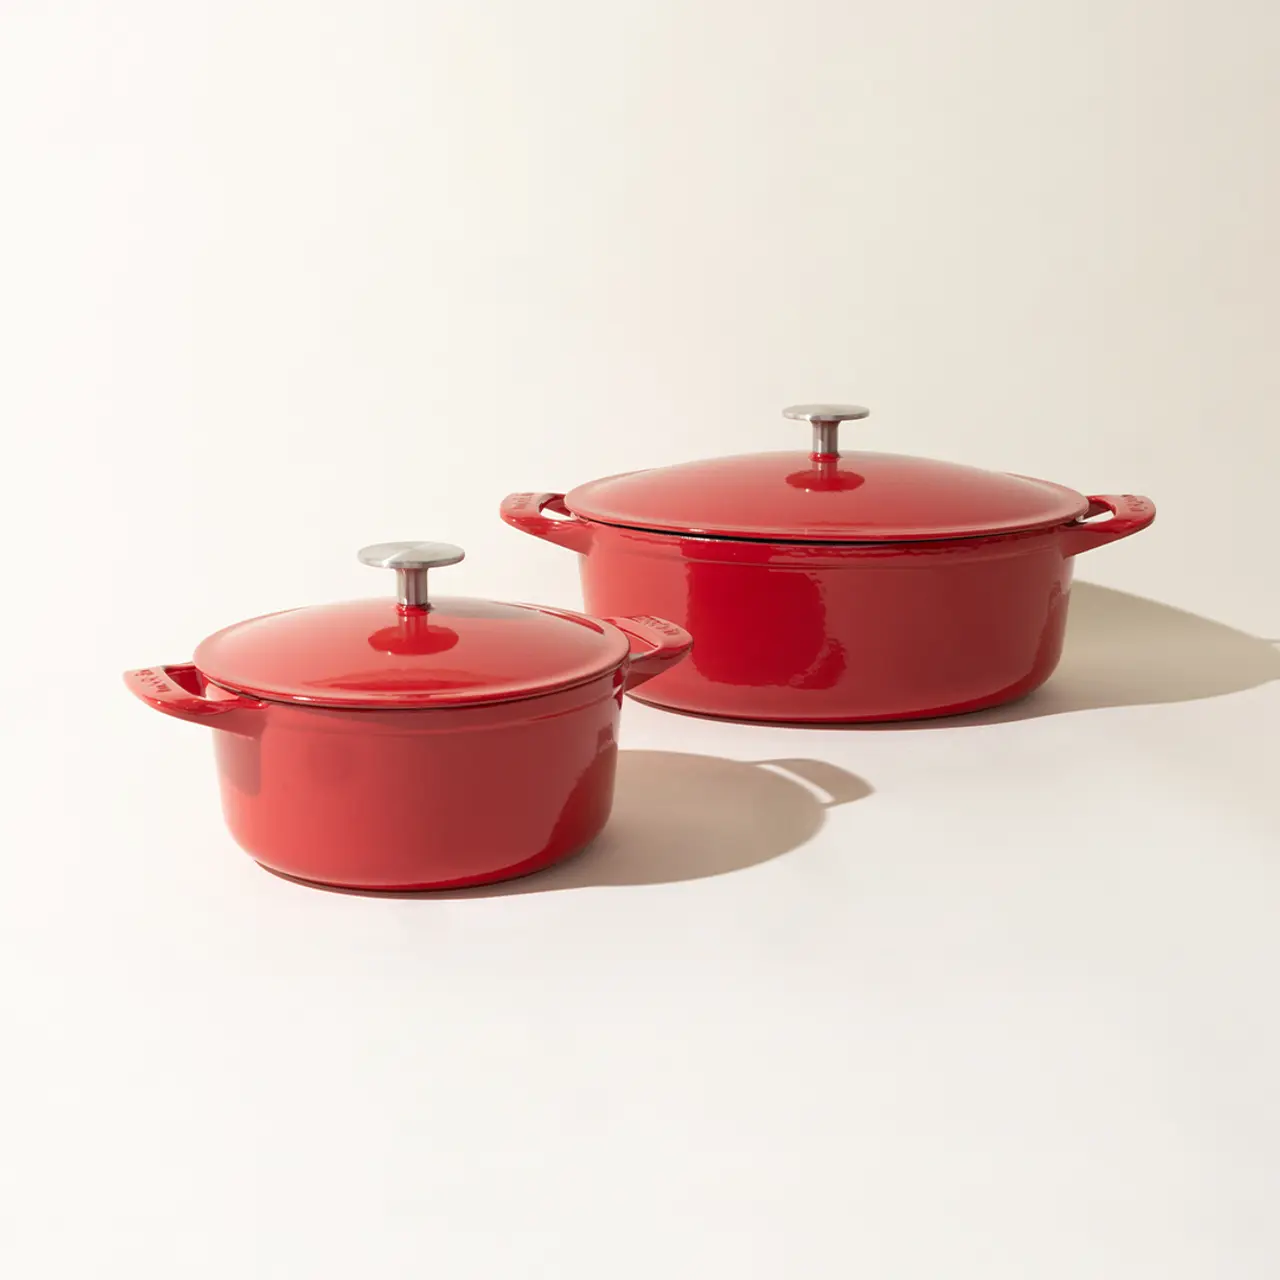 Two red enameled pots with lids on a light background.